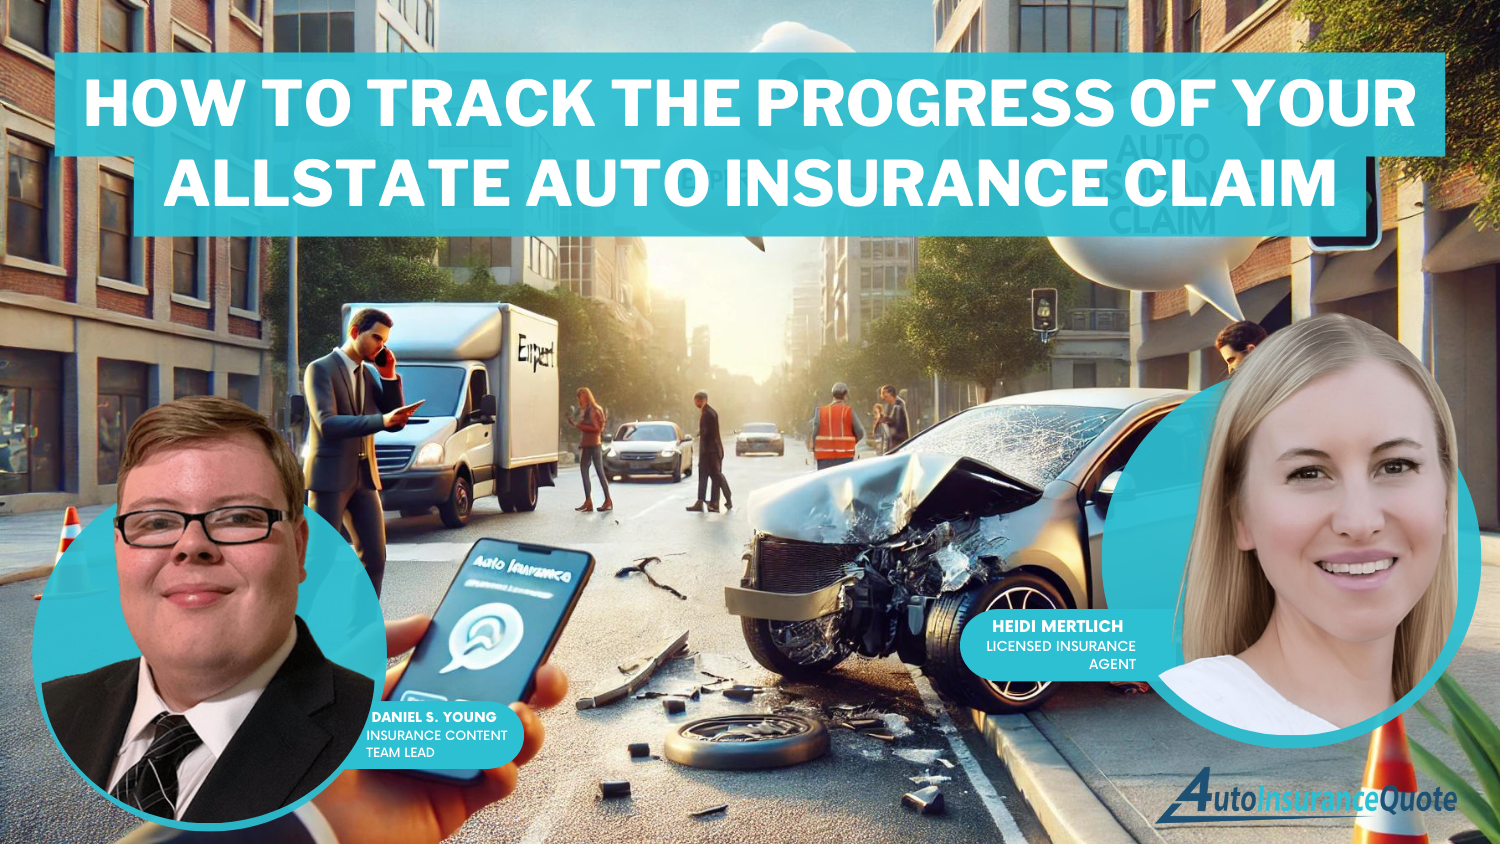 How to Track the Progress of Your Allstate Auto Insurance Claim